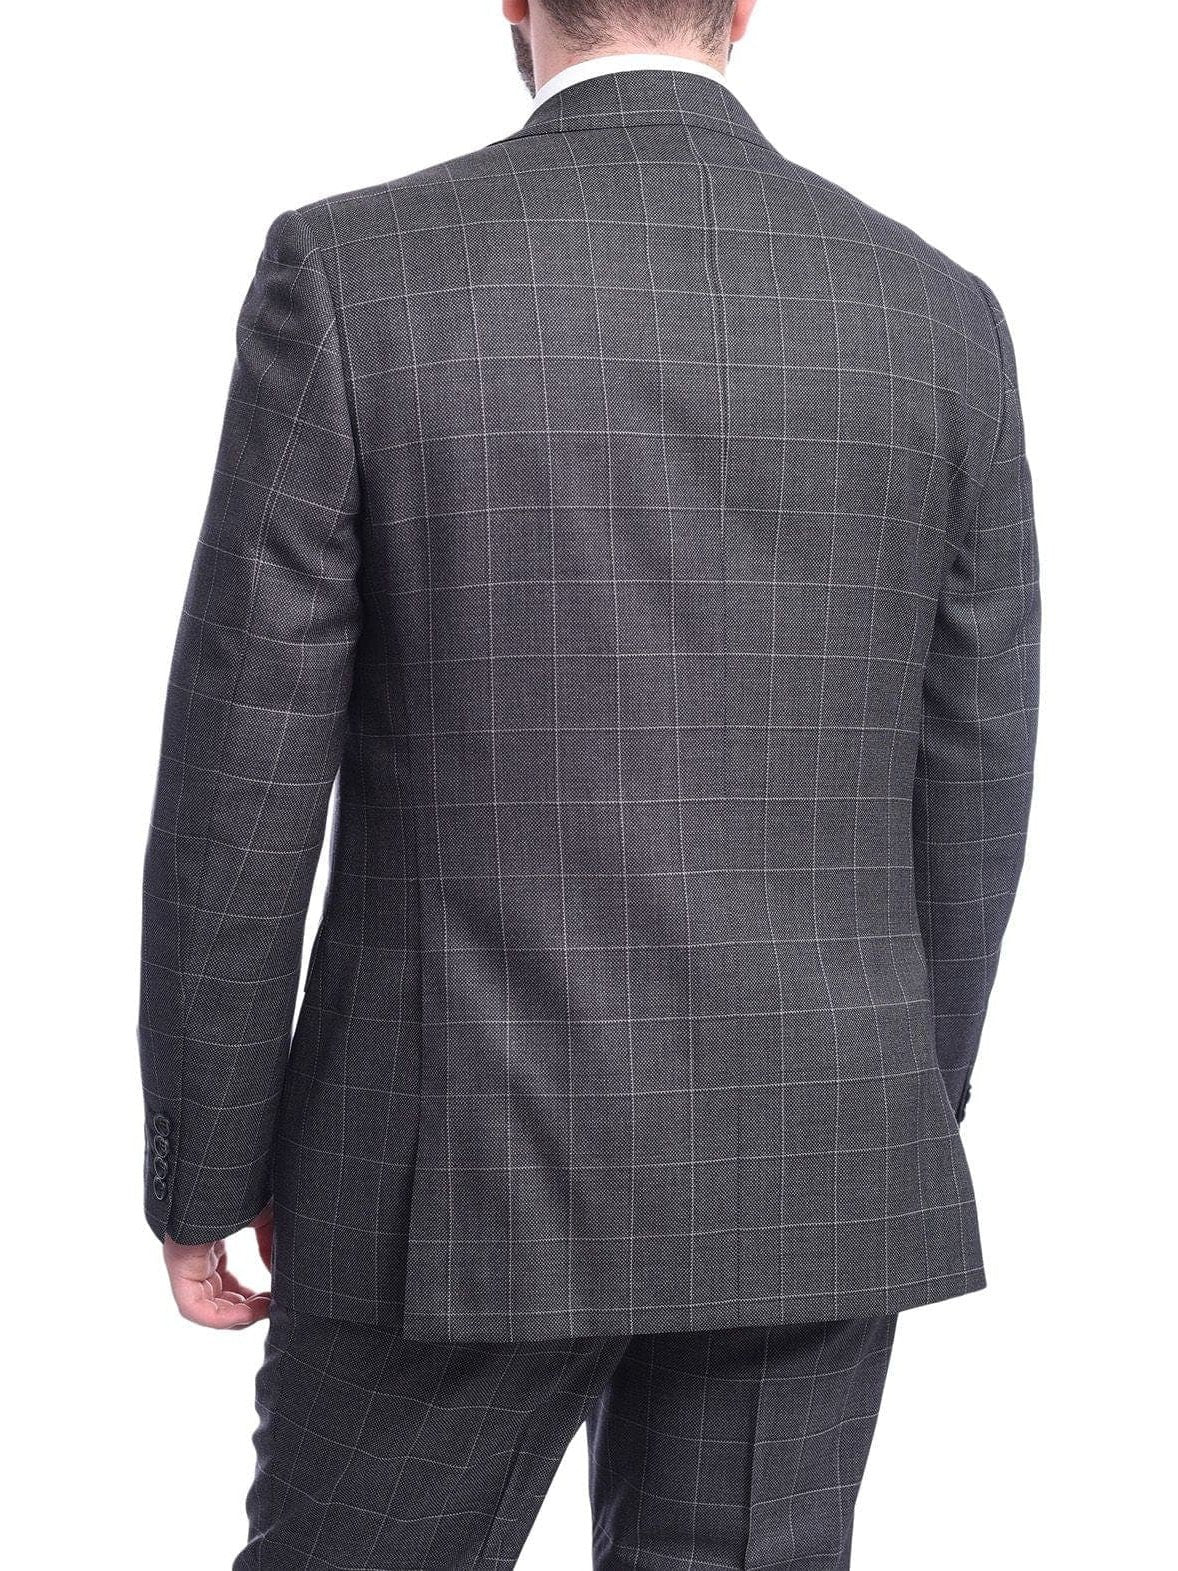 Napoli TWO PIECE SUITS Men's Napoli Classic Fit Charcoal Gray Plaid Two Button Half Canvassed Wool Suit